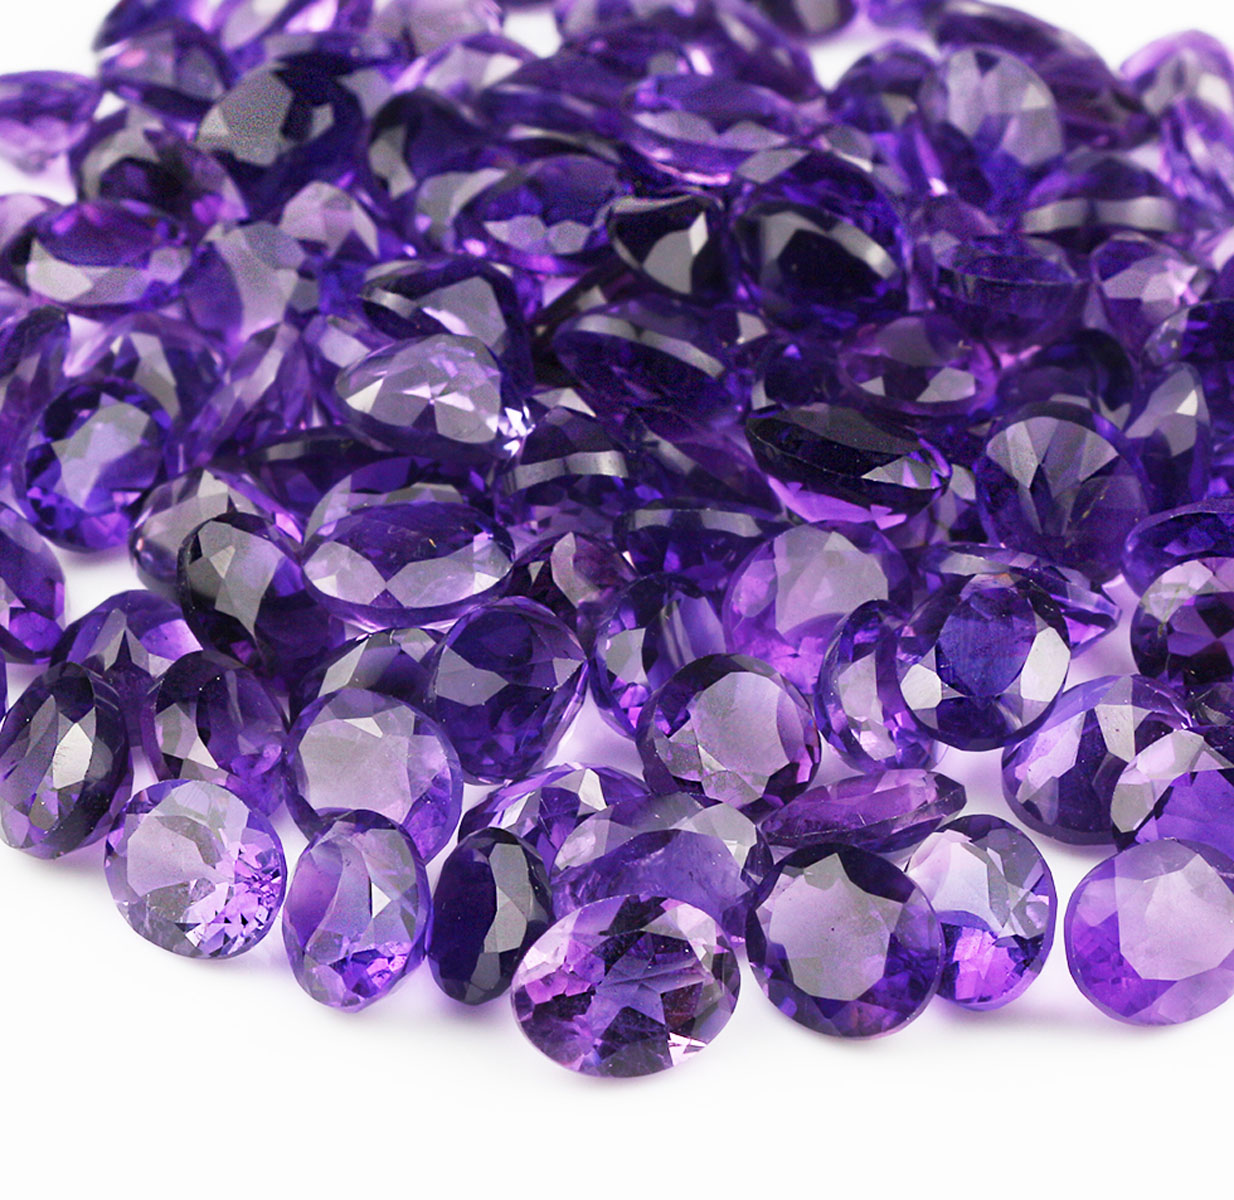 Amethyst faceted cut - Jewelry stones